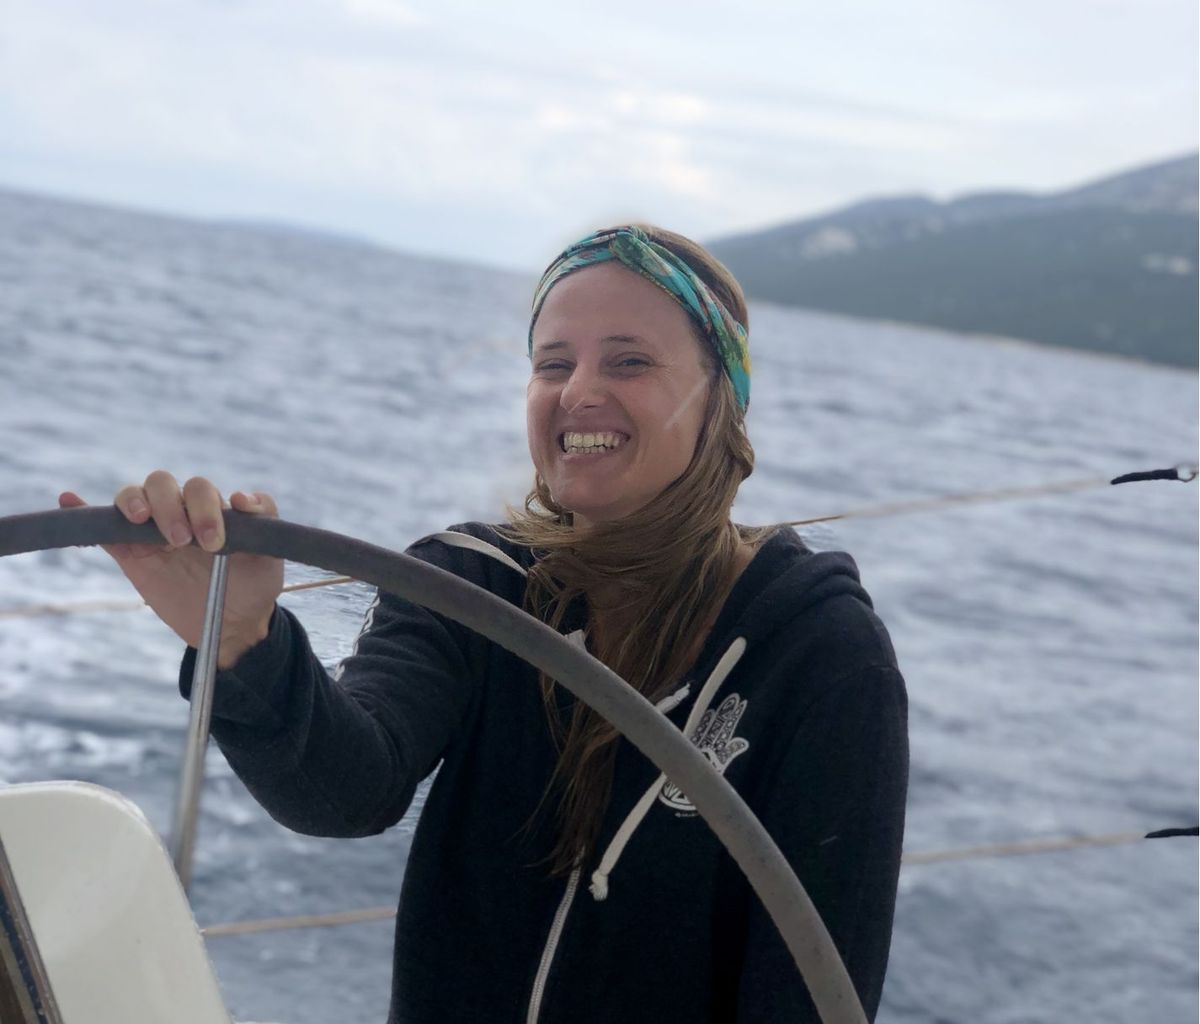 On a sailing trip: Stella Bollmann is enthusiastic about statistics, but she wants to cultivate her private life alongside her scientific activities.